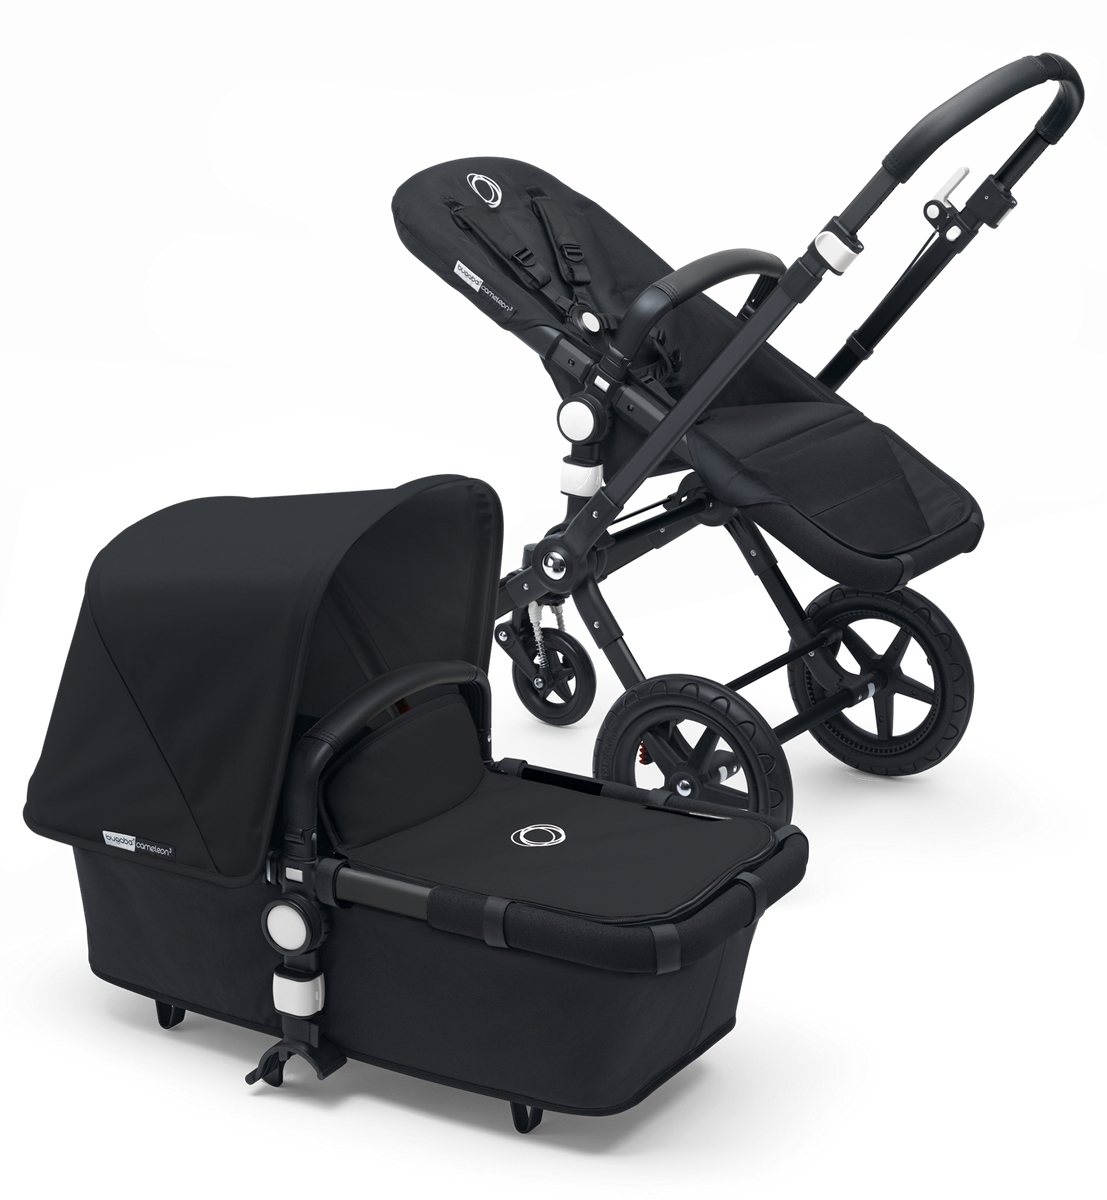 Bugaboo Cameleon 3 stroller reviews, questions, dimensions